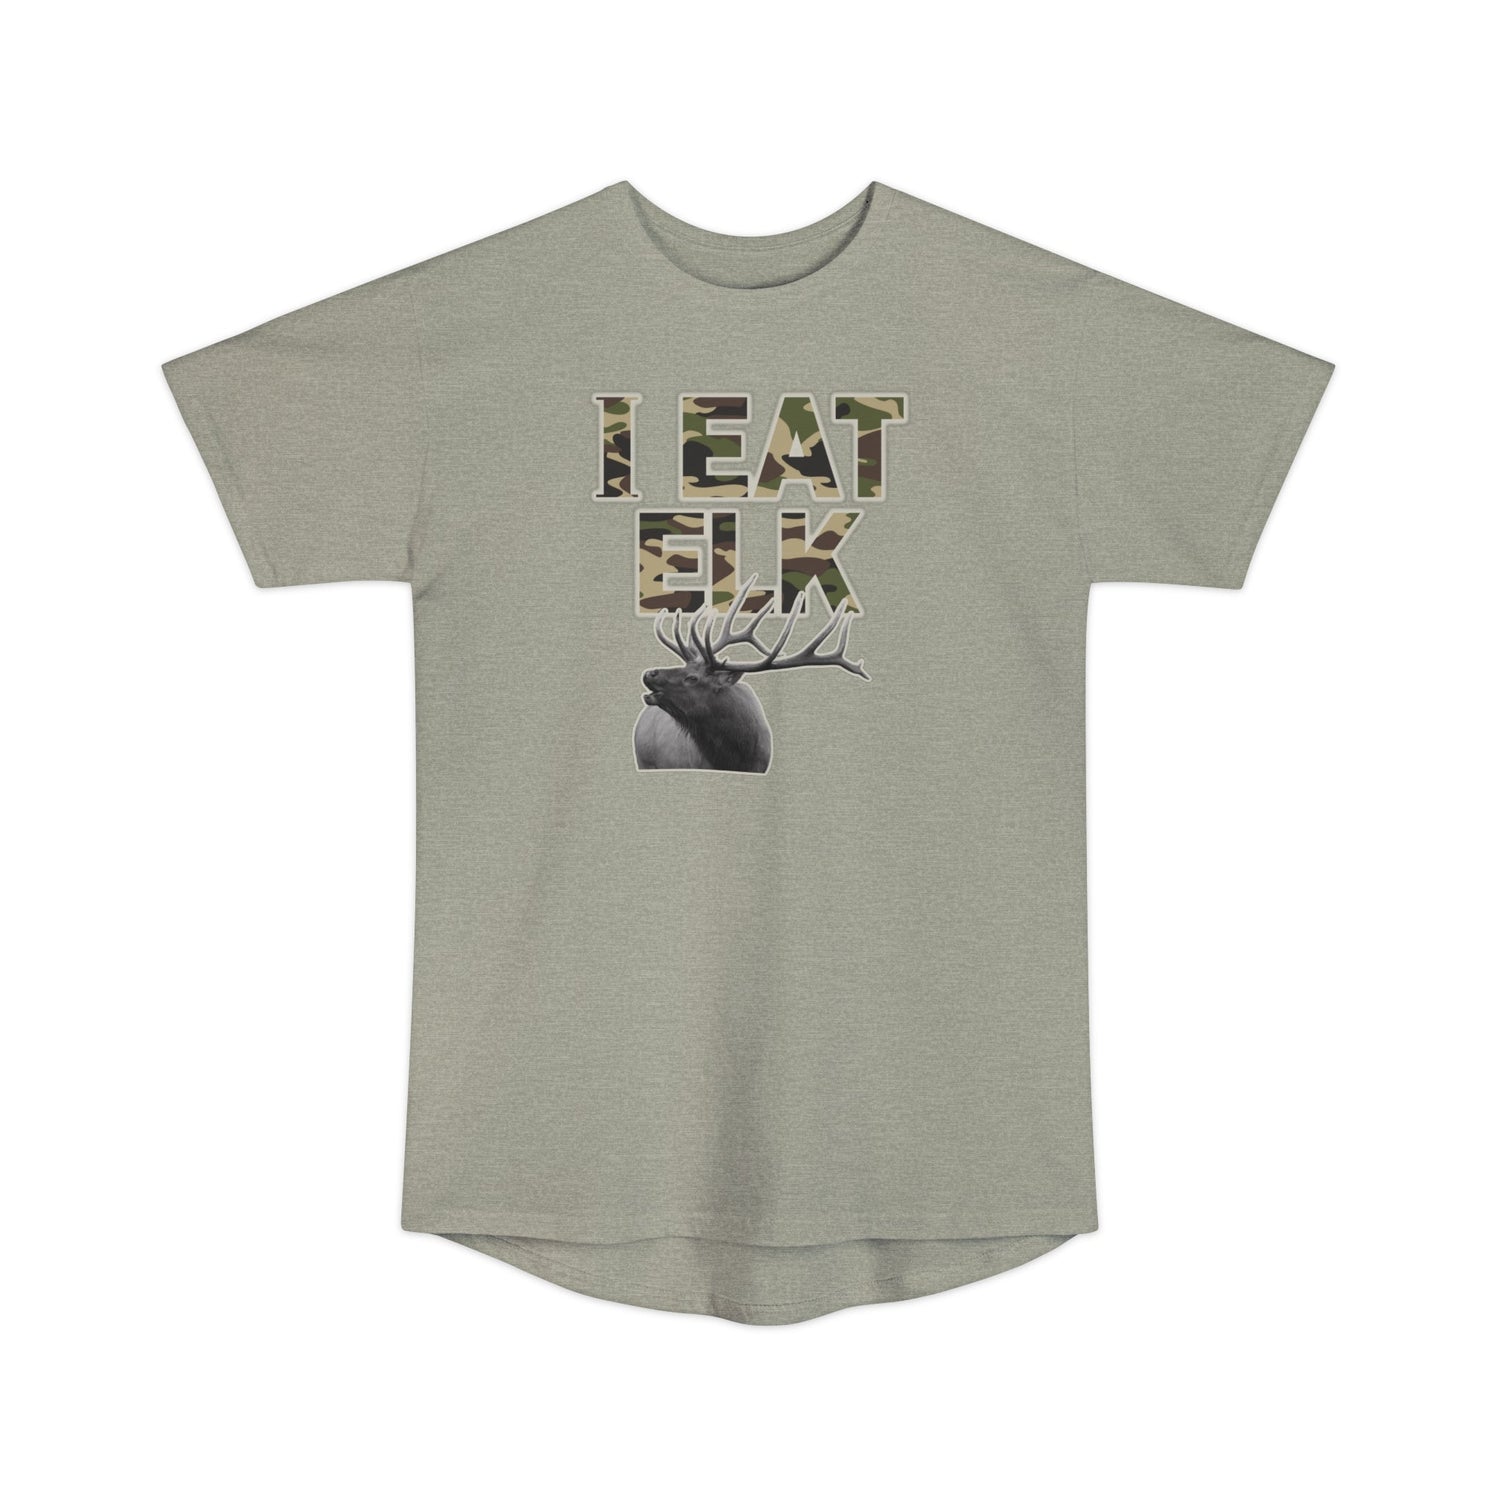 Athletic tall elk hunting t-shirt, color light grey, front design placement